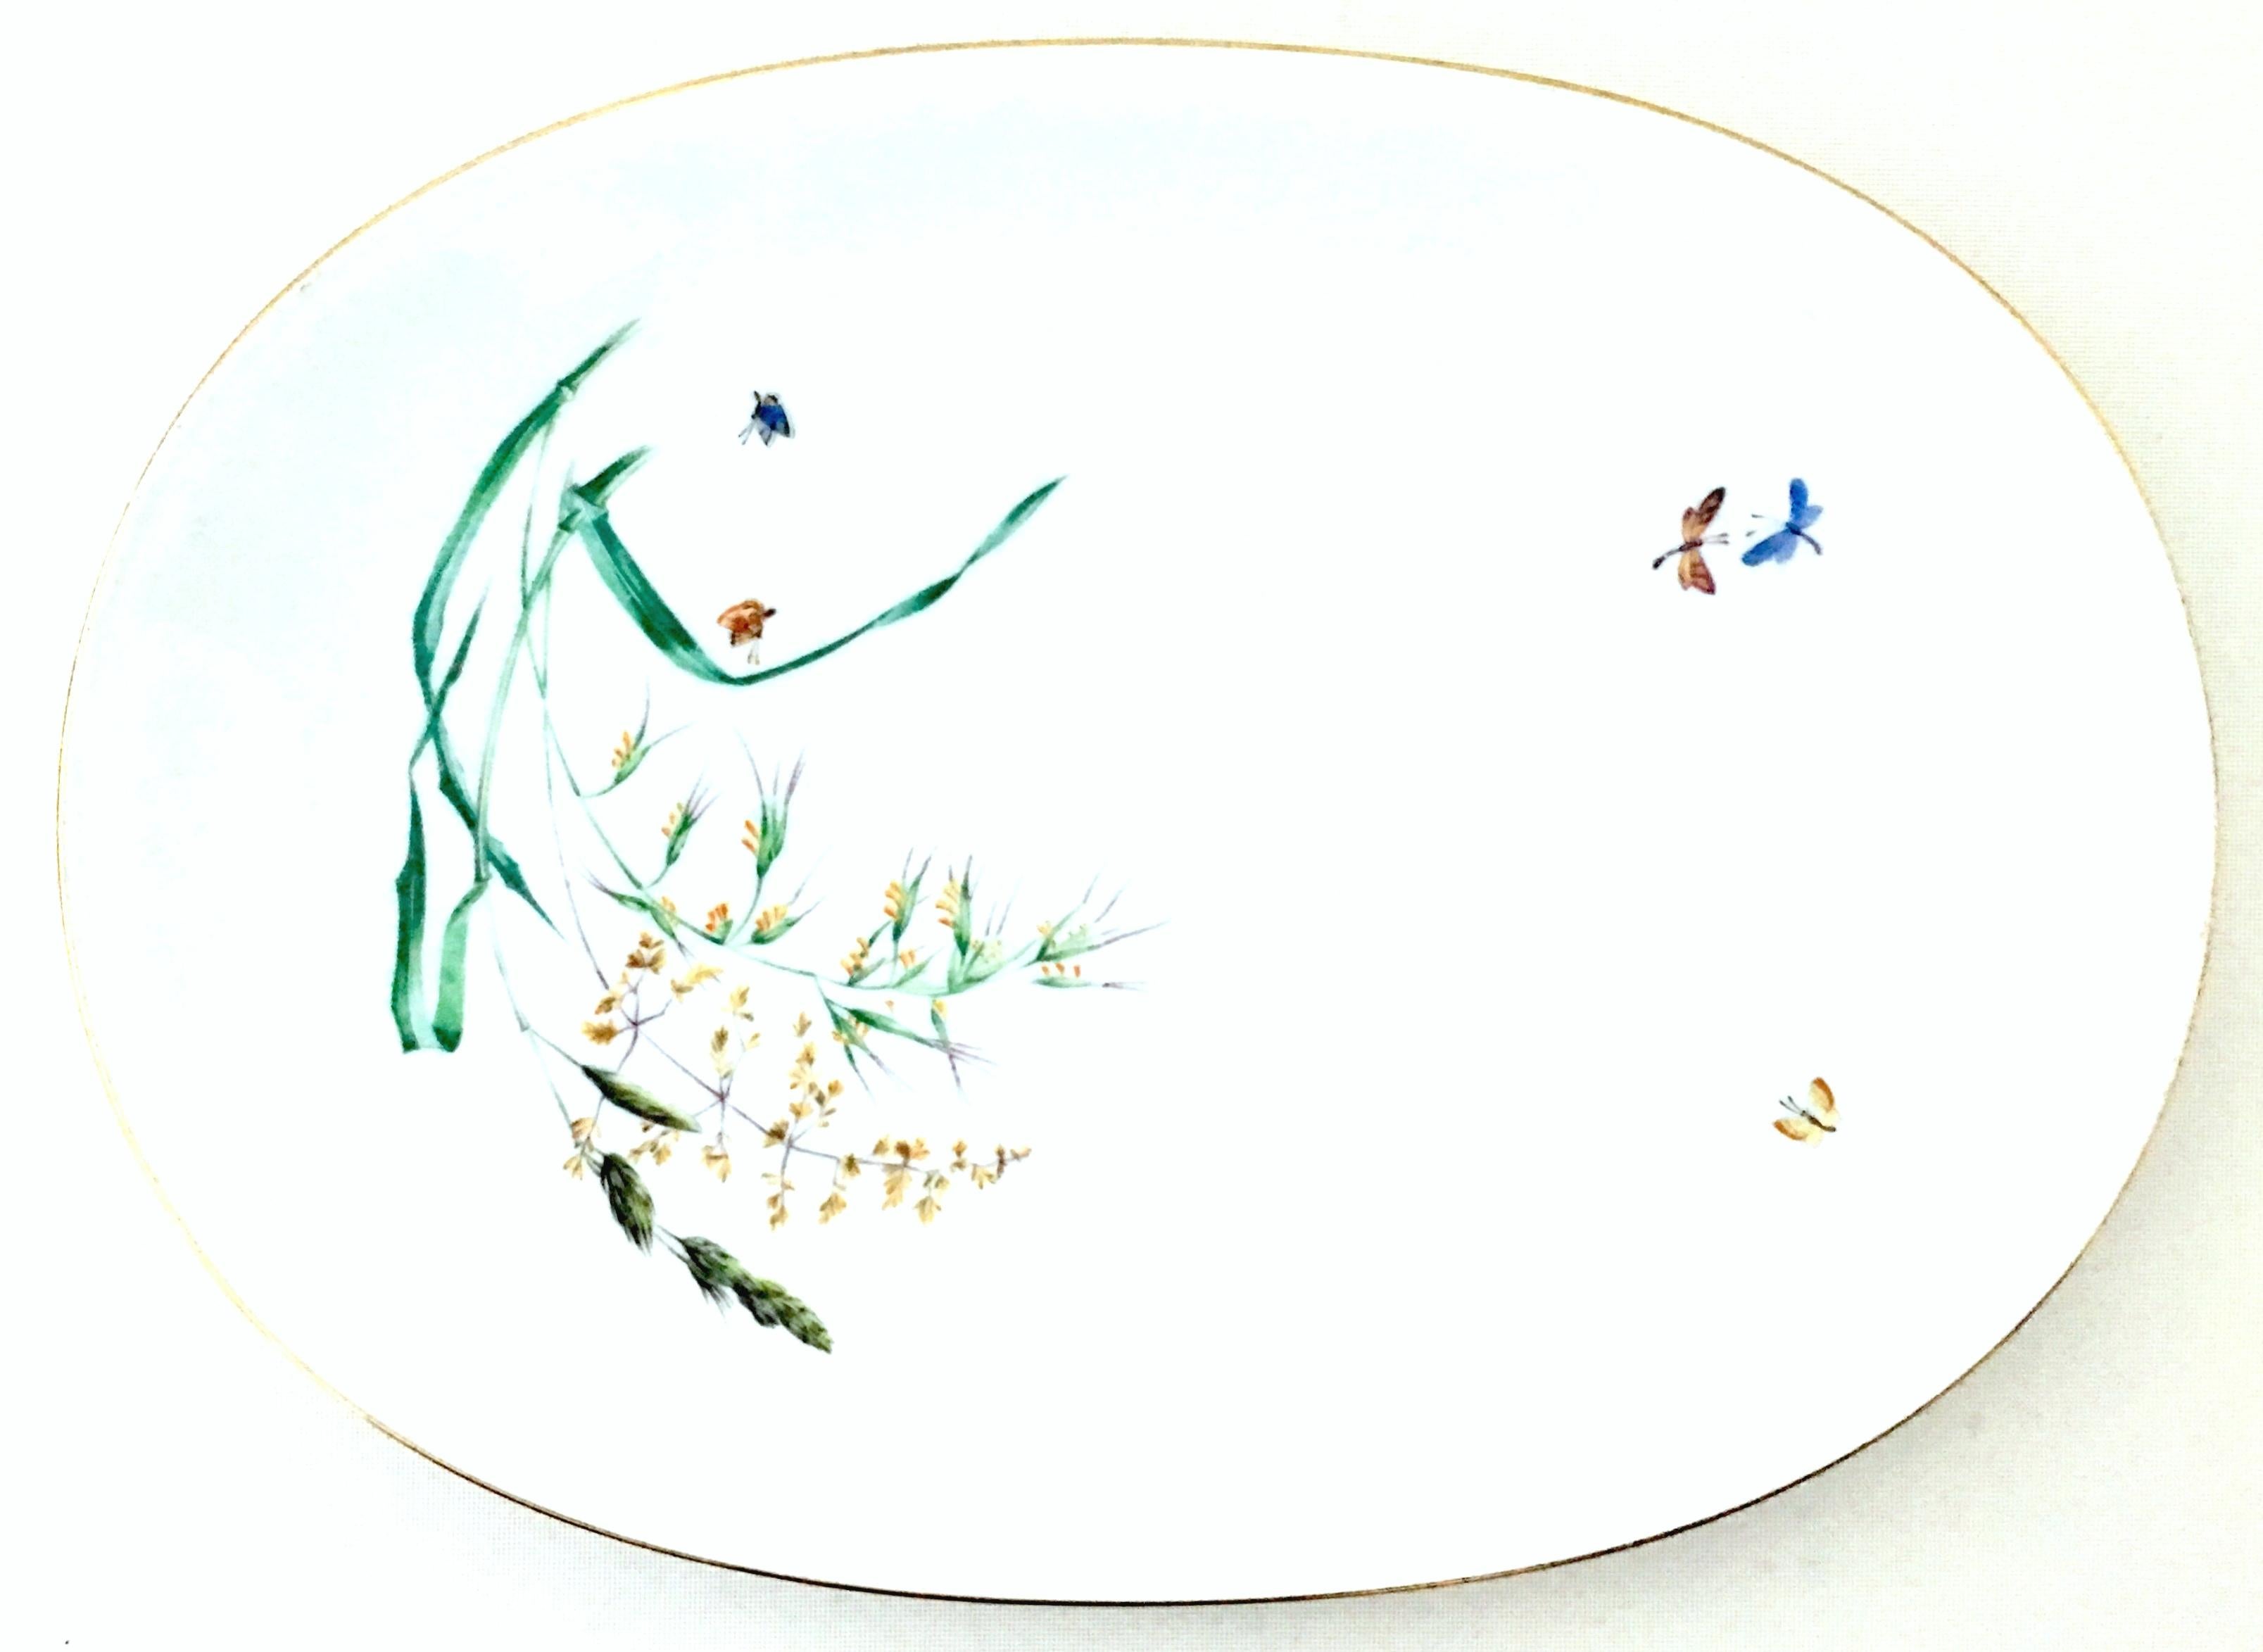 20th Century German hand-painted porcelain organic form oval platter with 22 karat gold rim edge by, Heinrich-H&C in the 